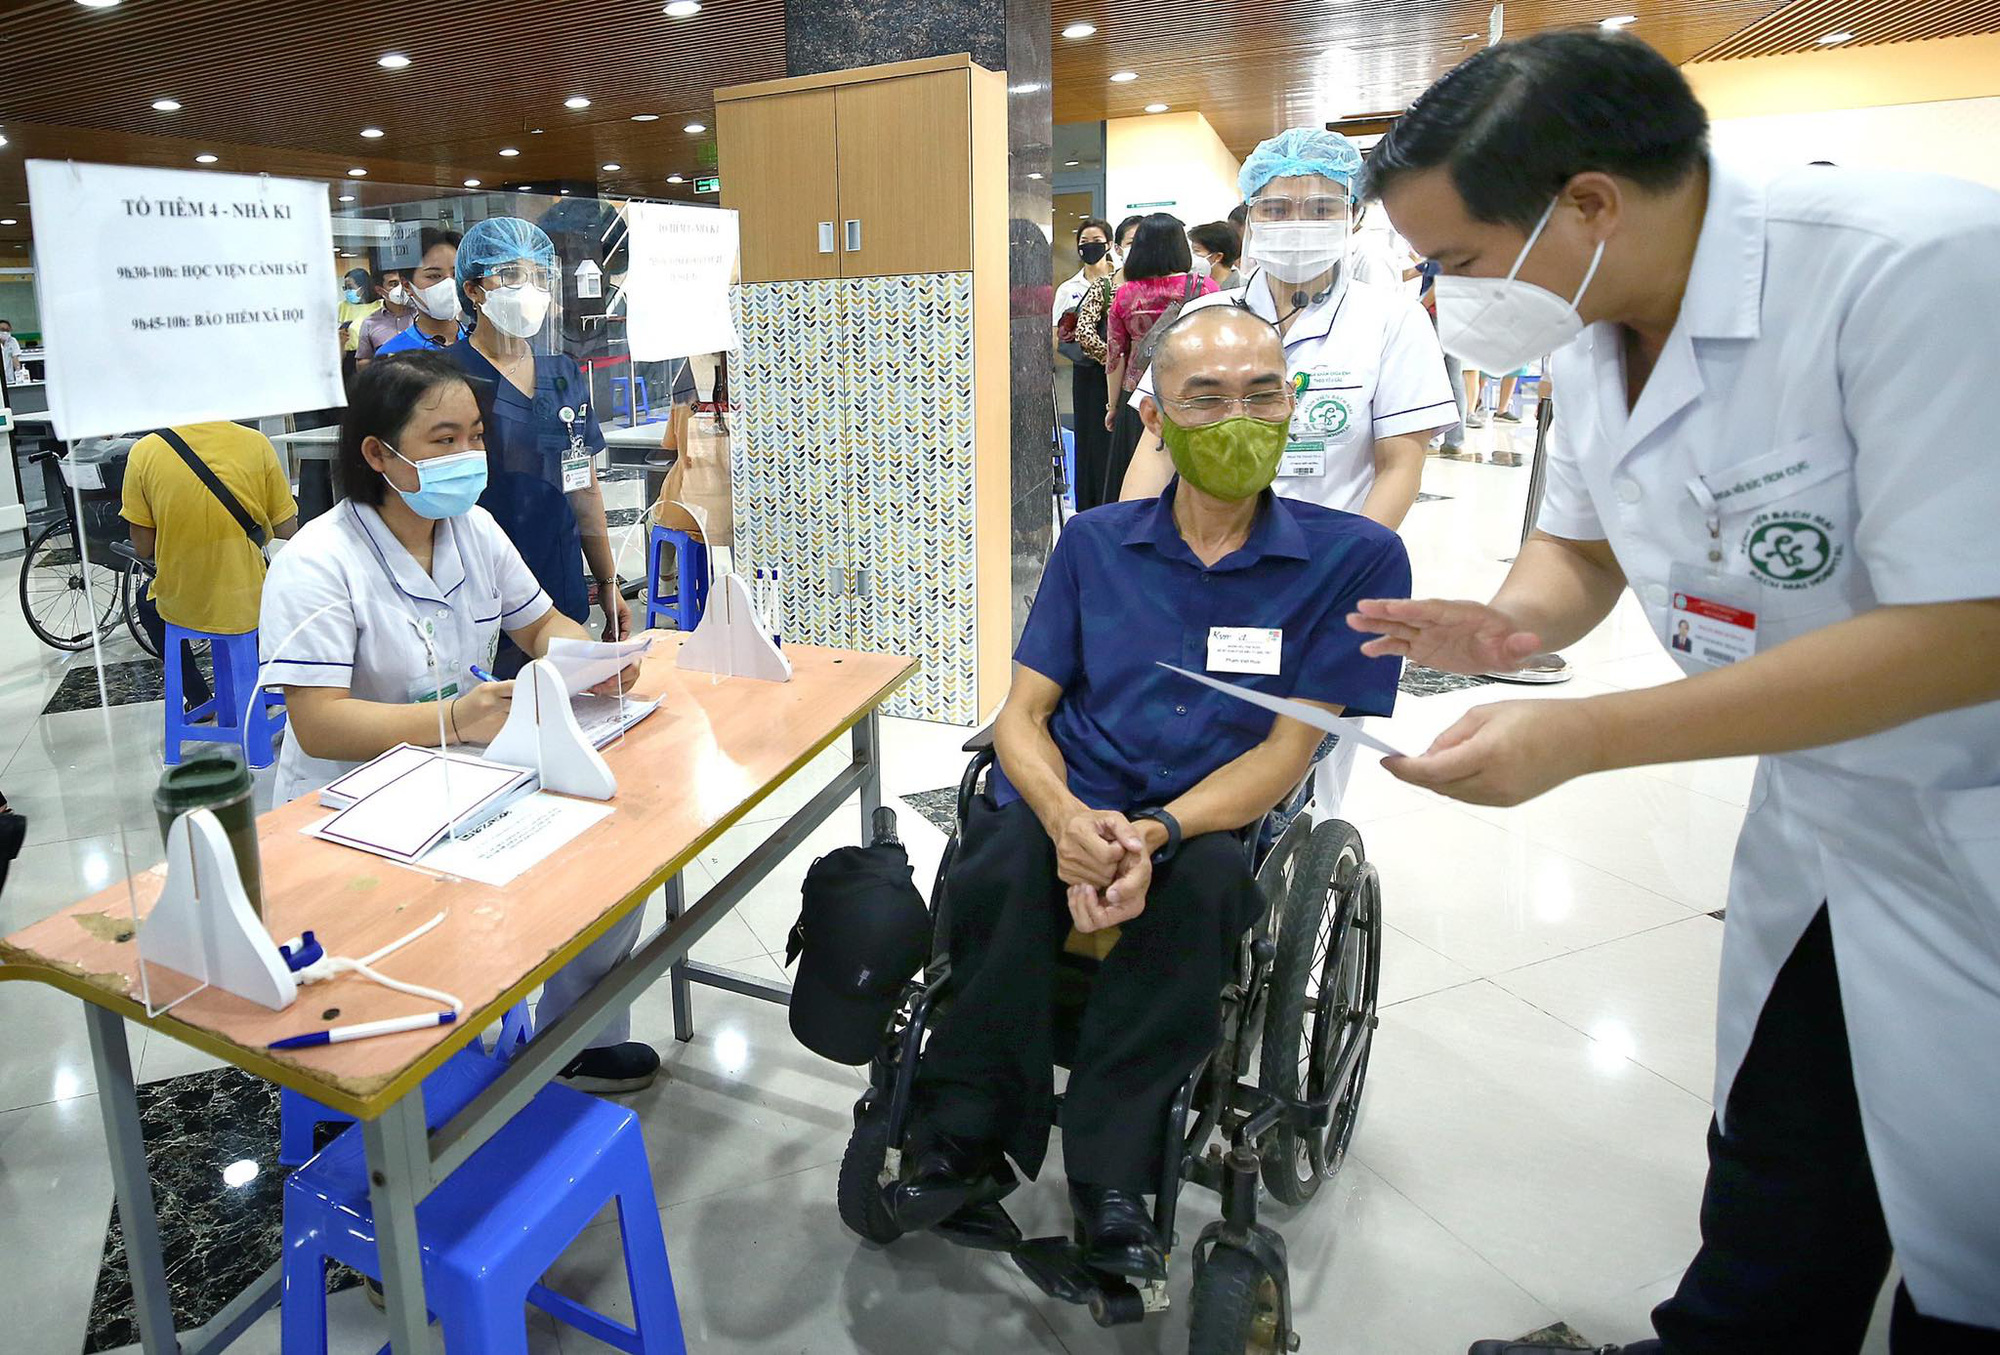 A staff member assists a disabled worker with paperwork before a COVID-19 vaccination session in Hanoi, July 29, 2021. Photo: Ministry of Planning and Investment